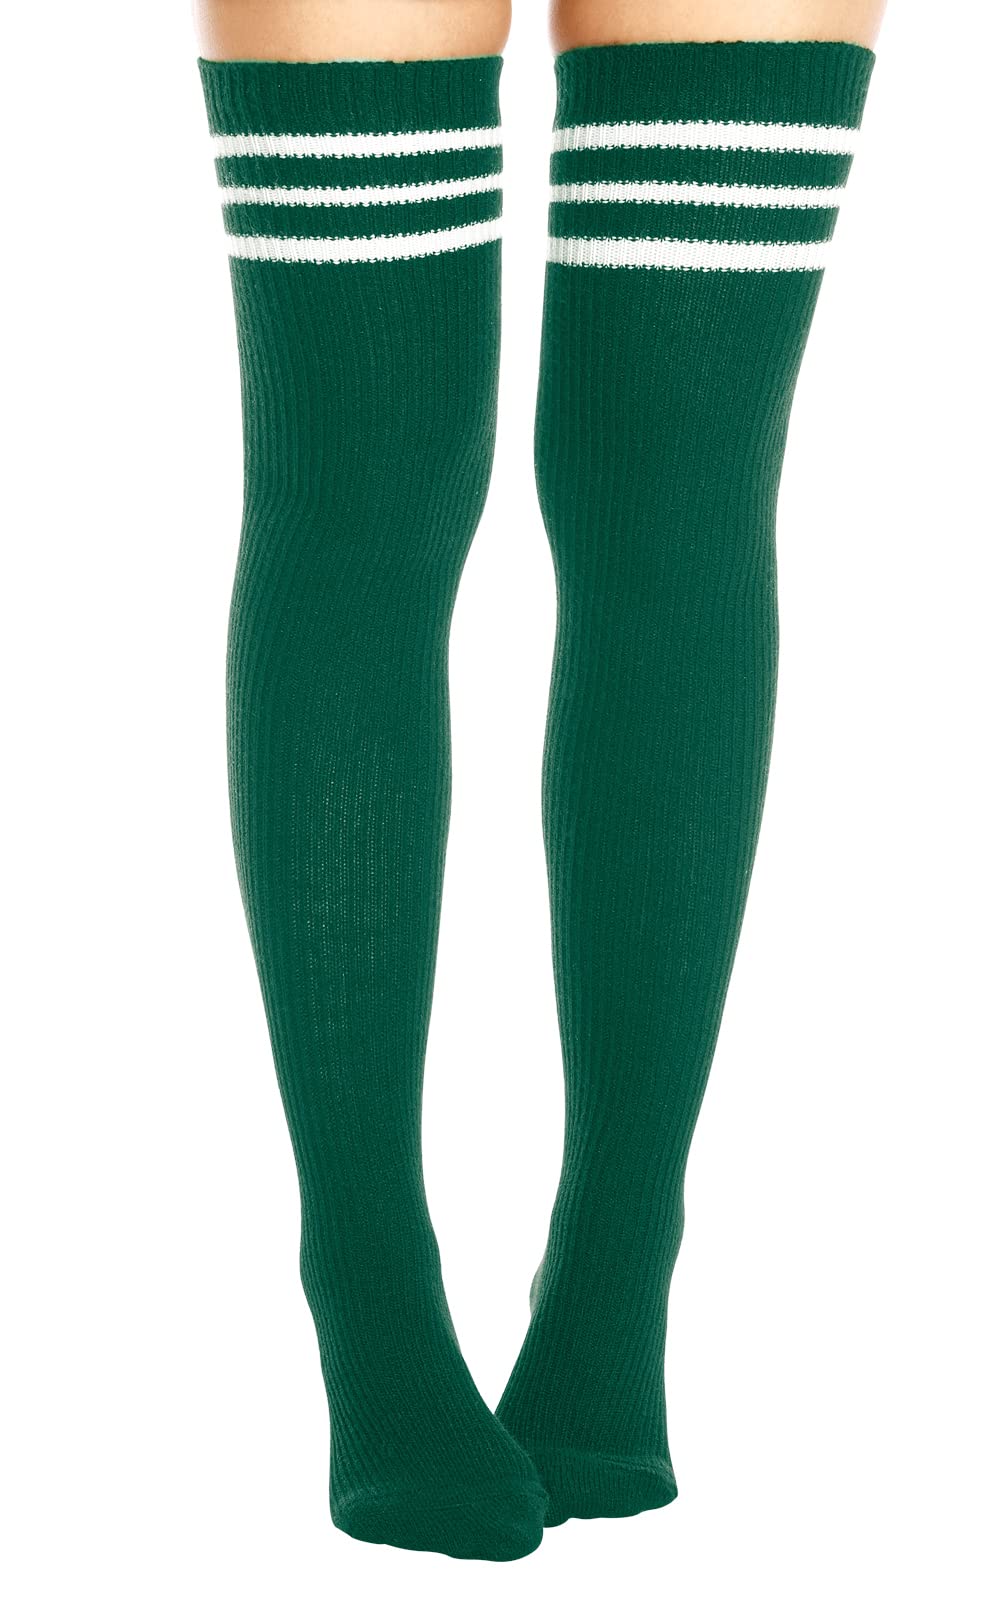 Extra Long Warm Knit Striped Thigh Highs Leg Warmers-Emerald Green & White Striped - Moon Wood